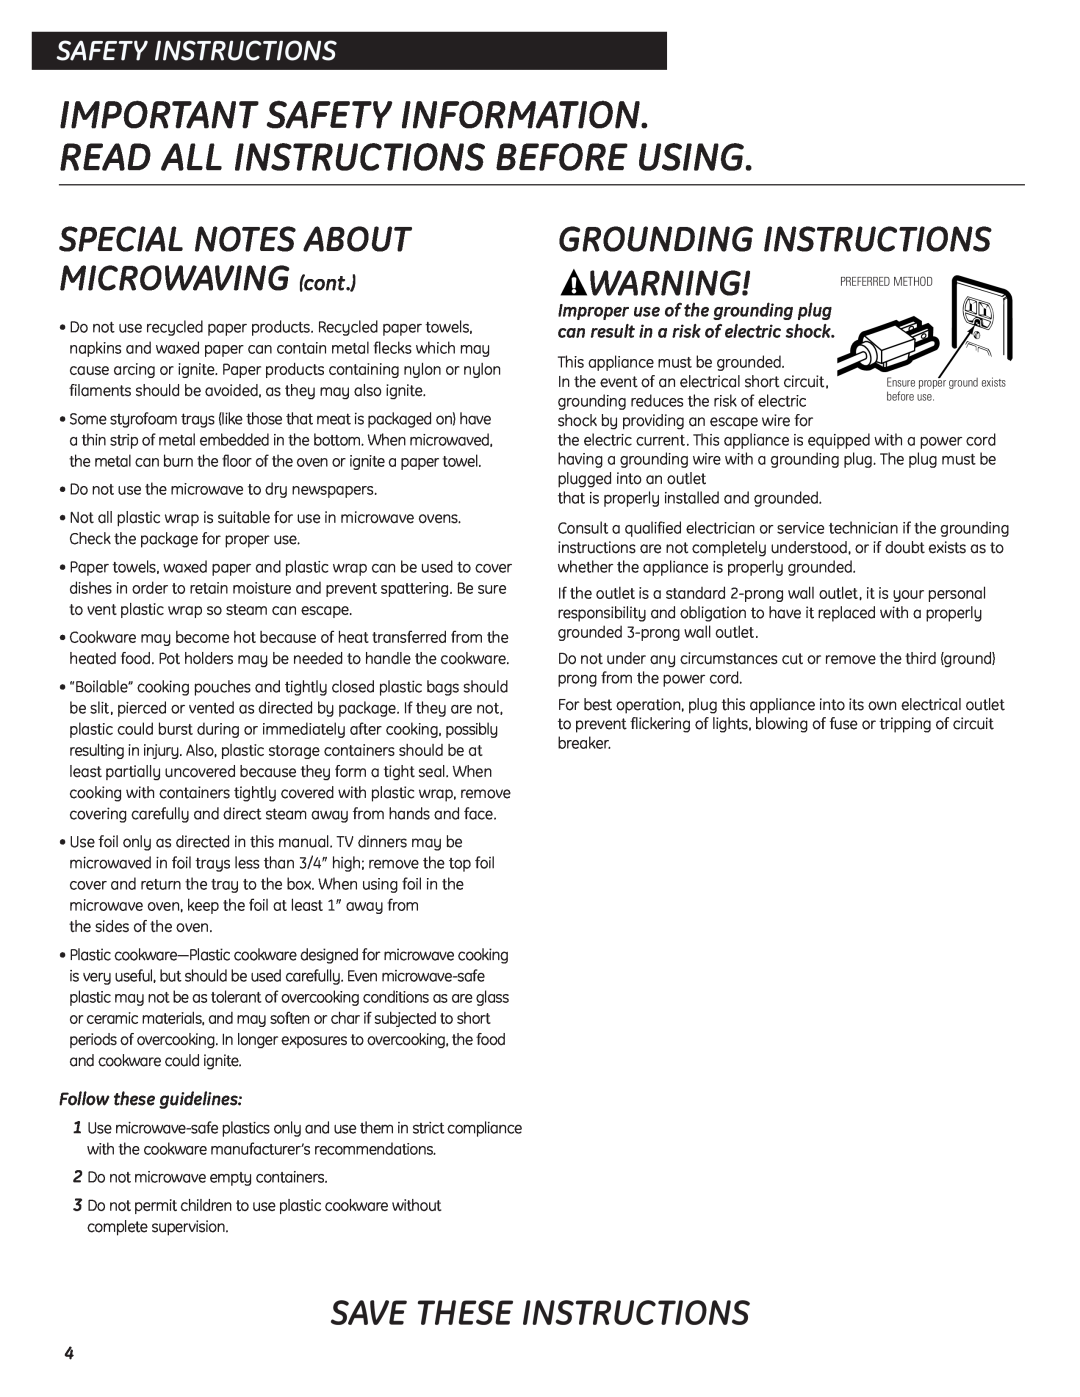 GE SESO732 Special Notes About, MICROWAVING cont, Grounding Instructions, Follow these guidelines, Save These Instructions 